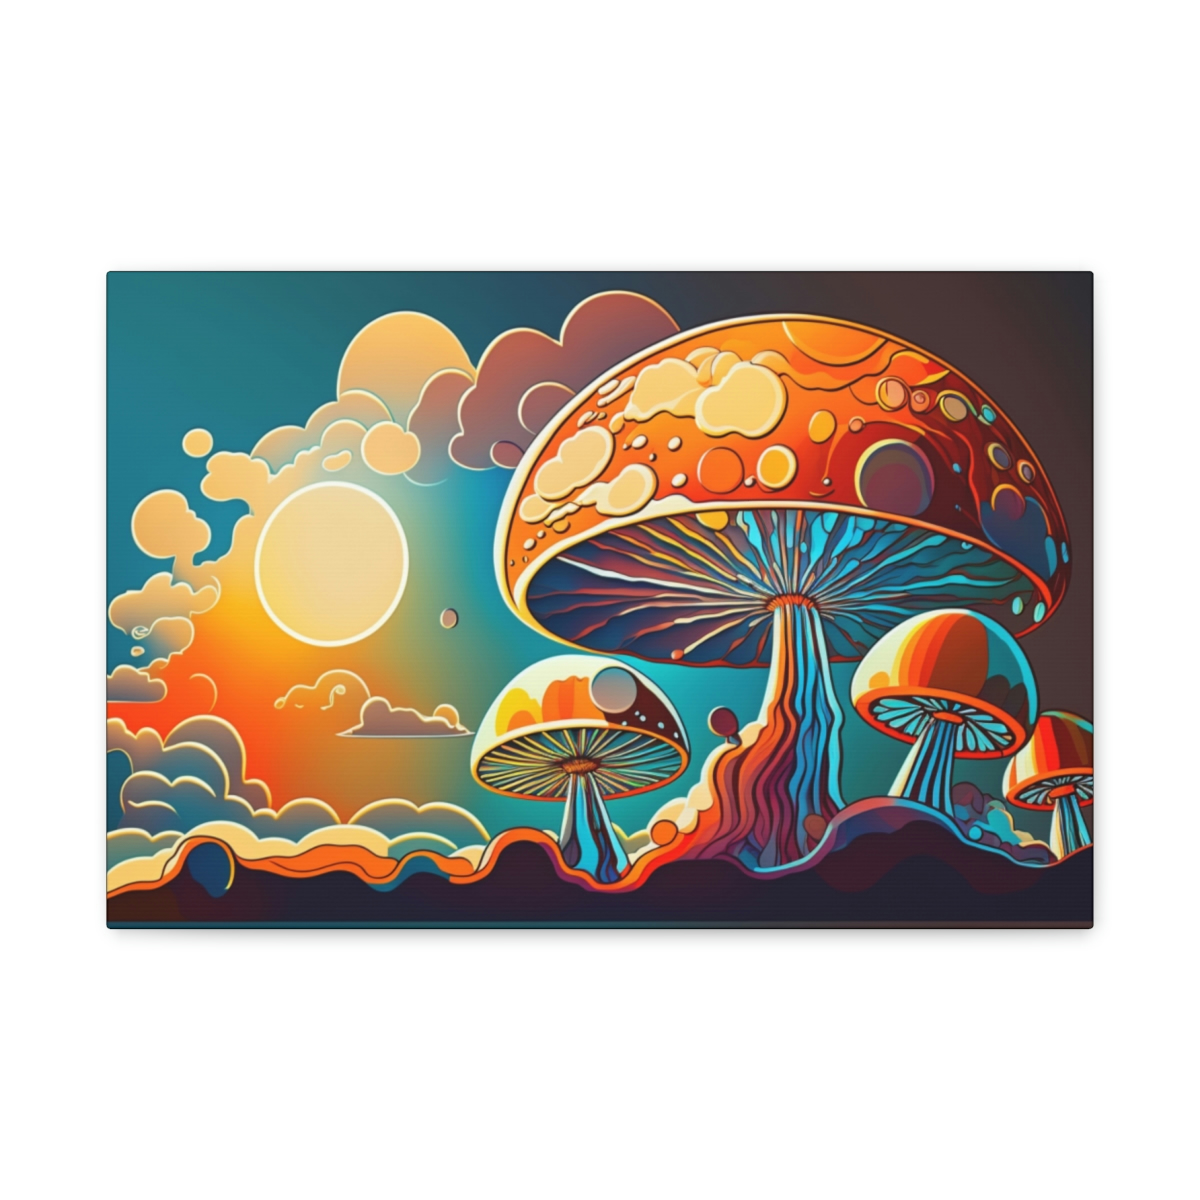 Trippy Wall Art, Home Decor, Apparel For Stoners & Psychonauts